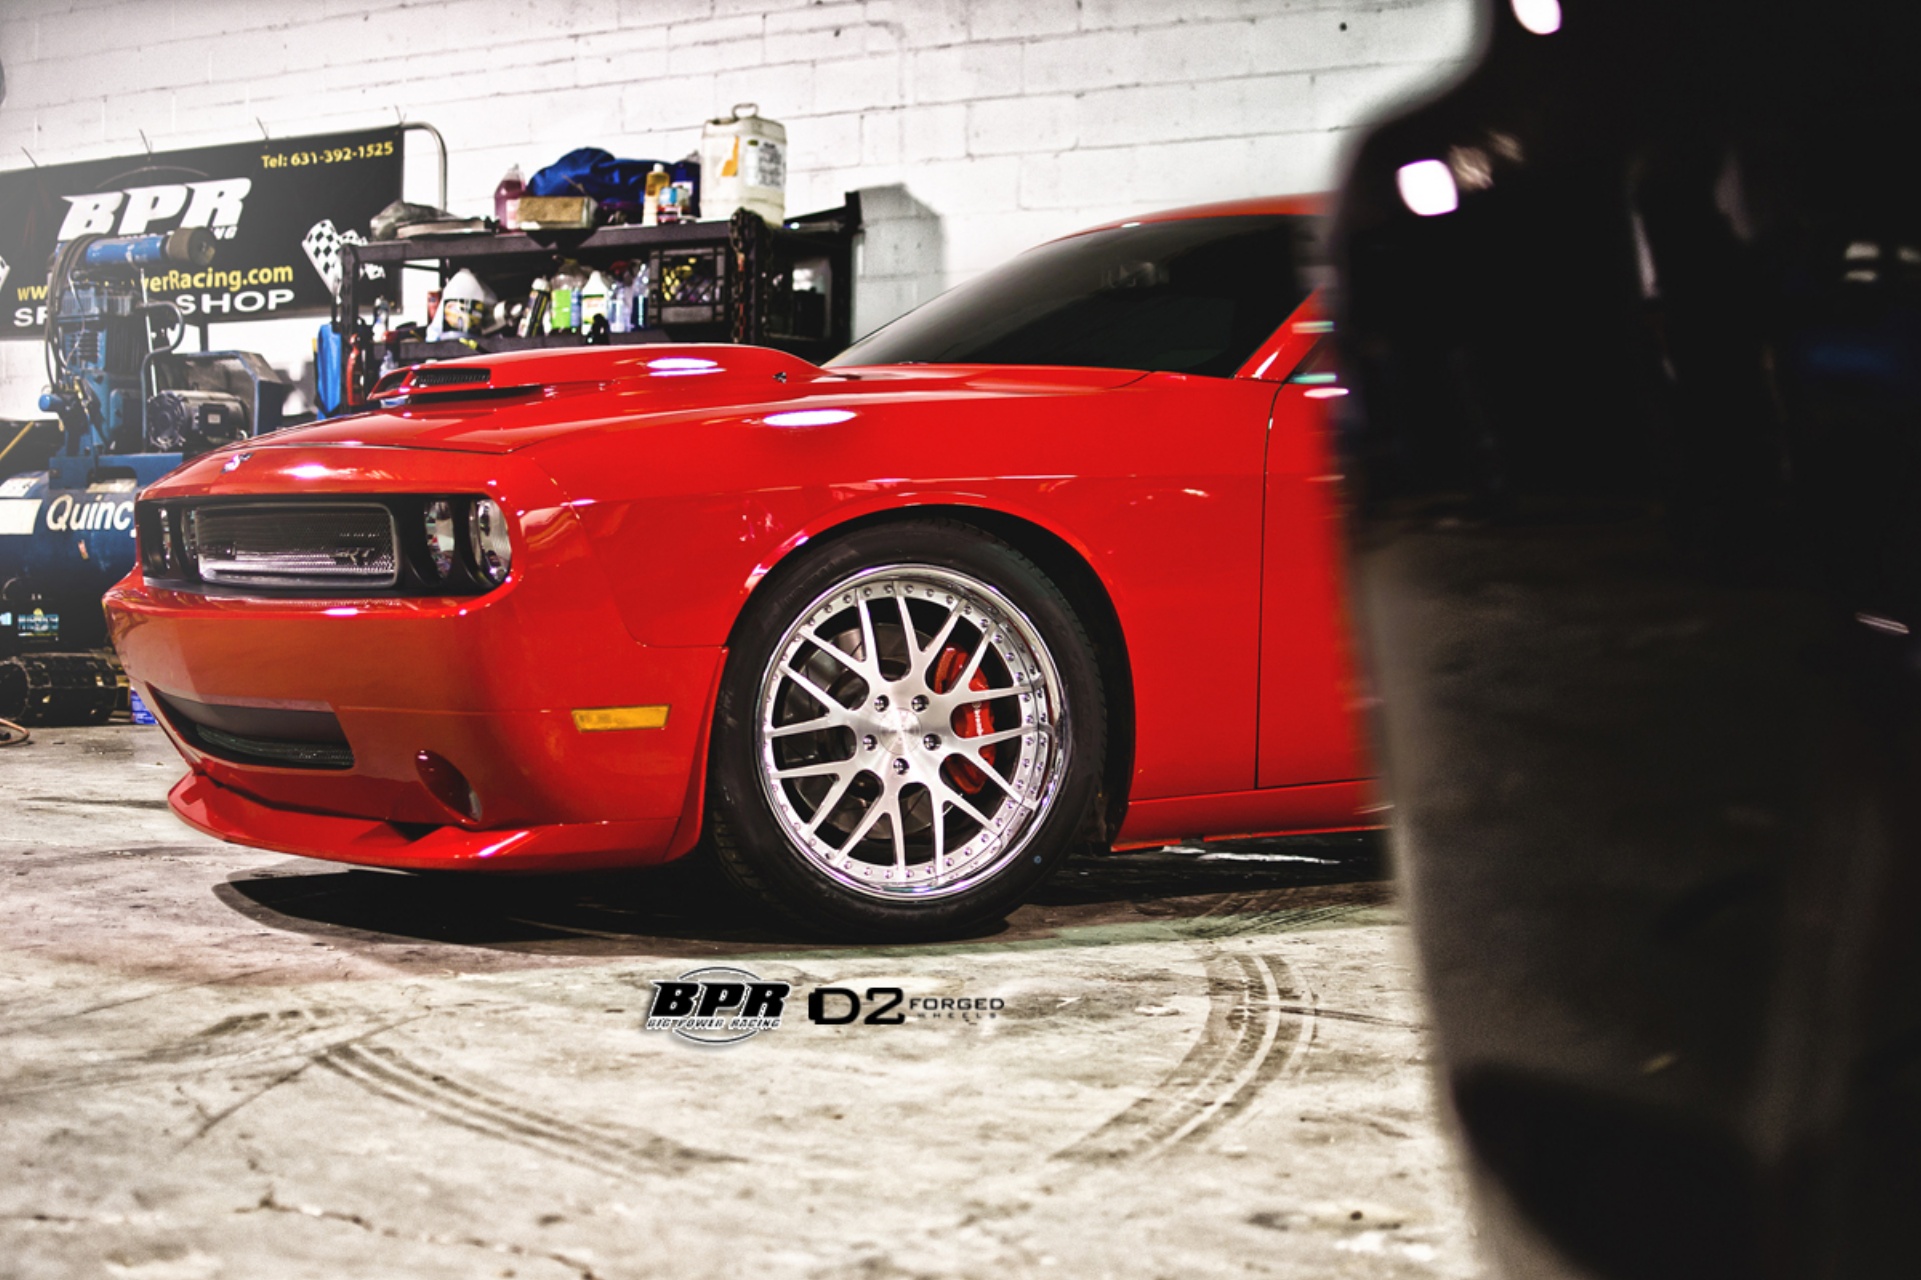 2012, D2forged, Dodge, Challenger, Srt8, Tuning, Muscle, Hot, Rod, Rods, Wheel, Wheels Wallpaper